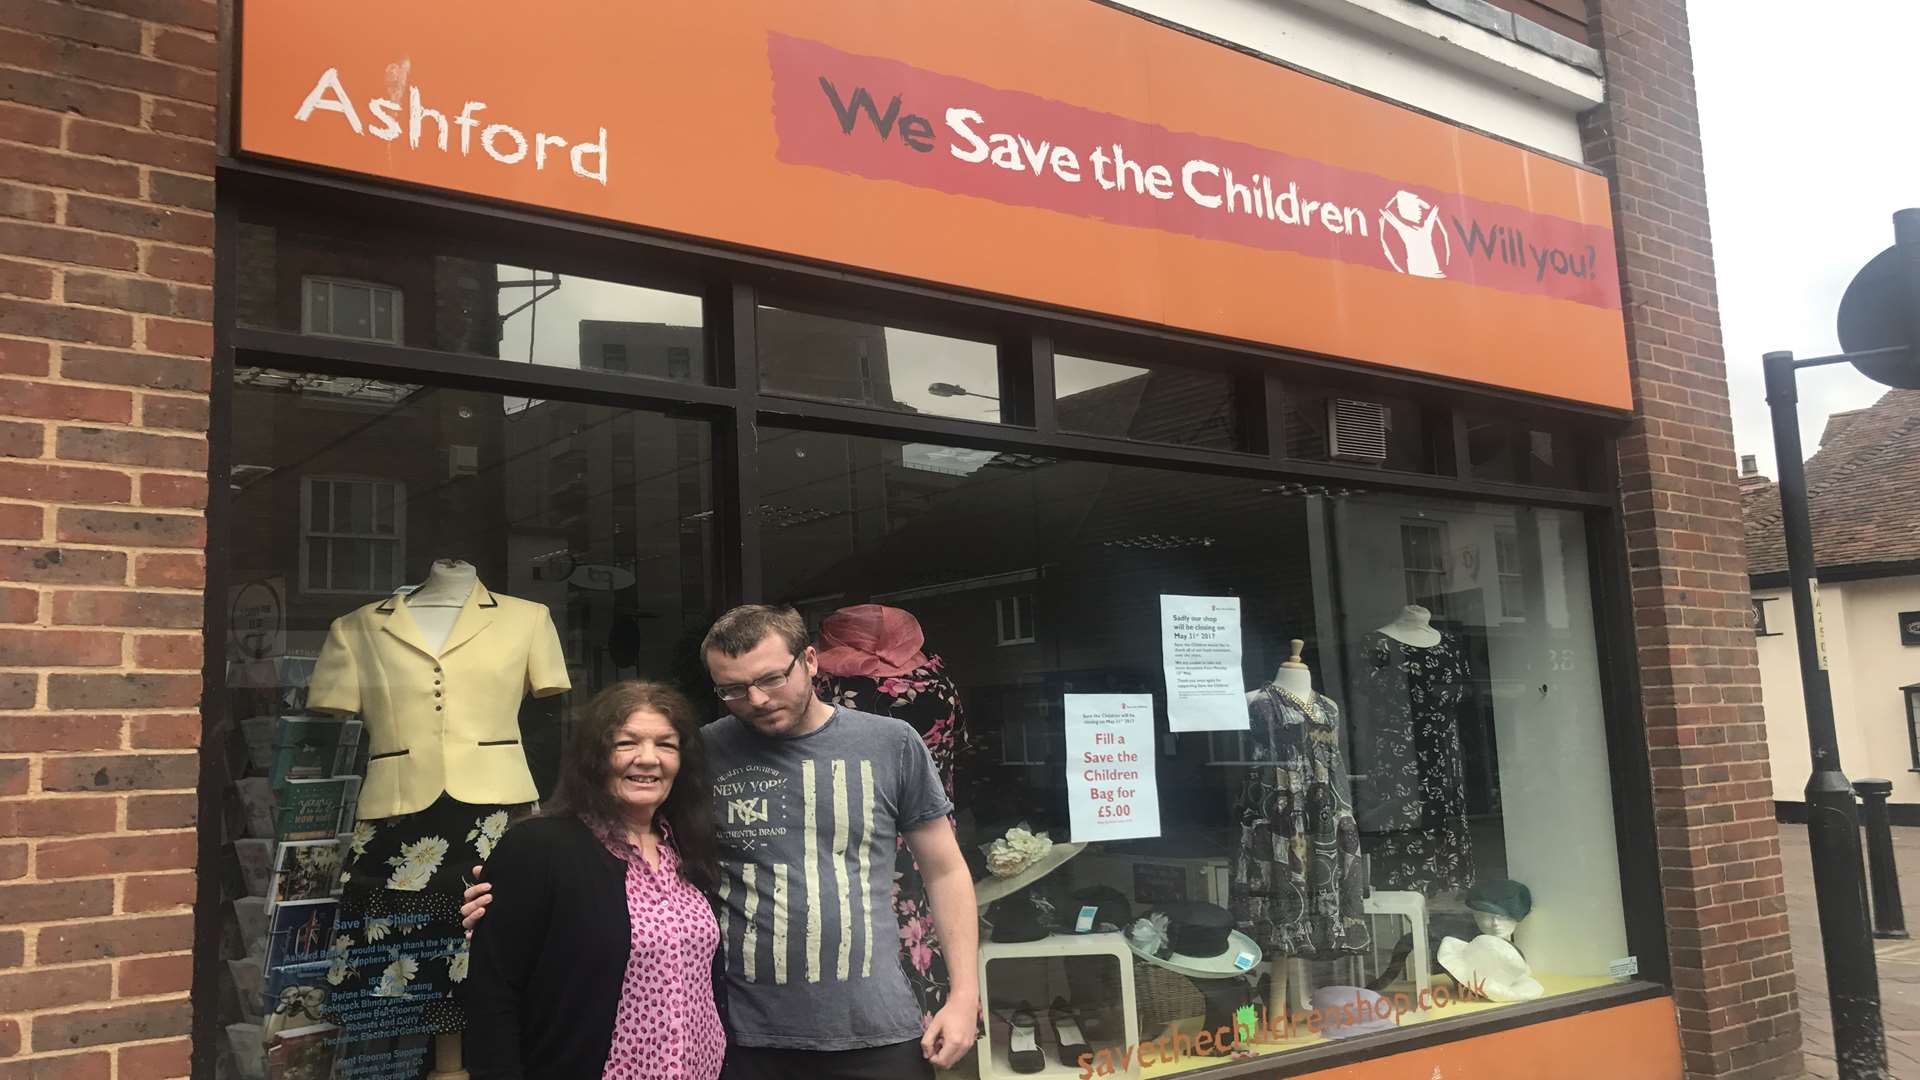 Volunteers Denise Whale and Karl Ruoff outside Ashford's Save the Children branch.